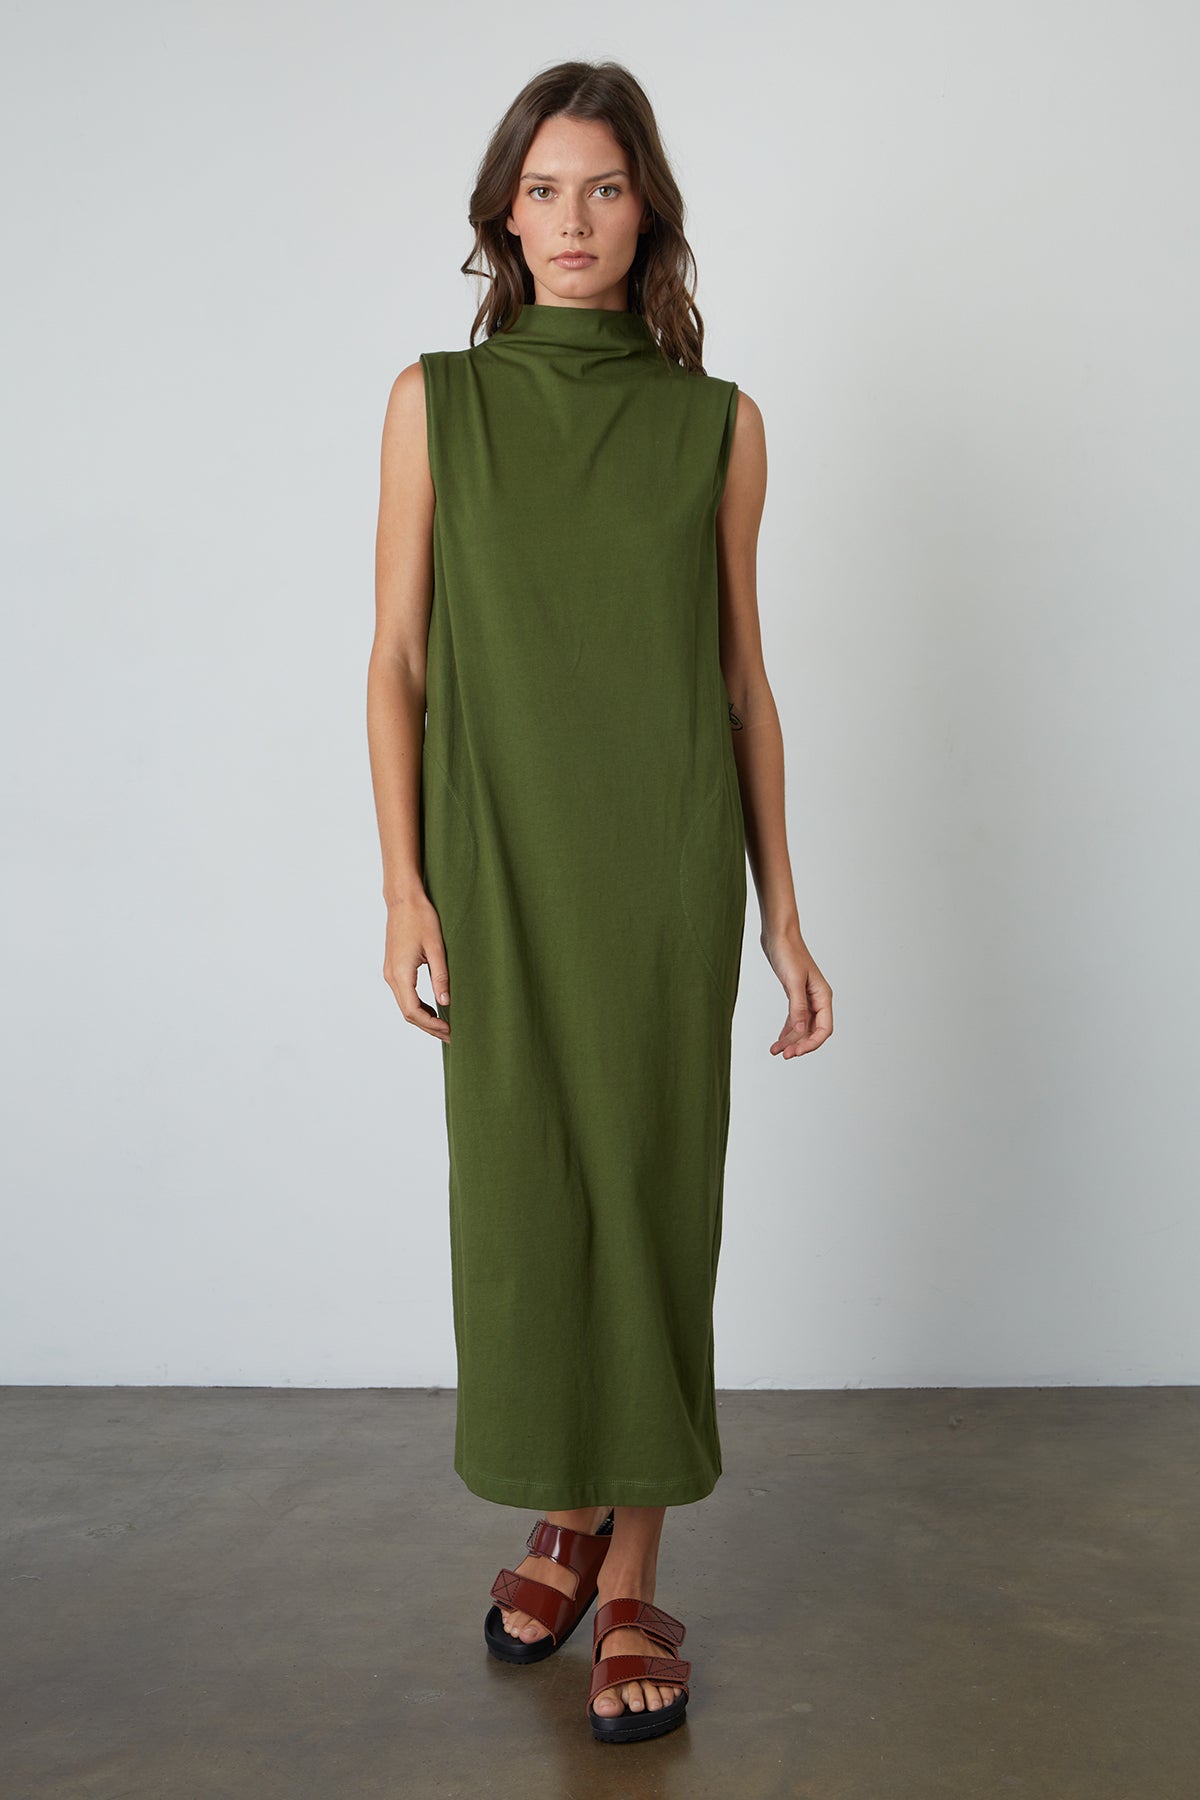 Hydie Mock Neck Dress Structured Cotton in Evergreen front view 2-24994489663681